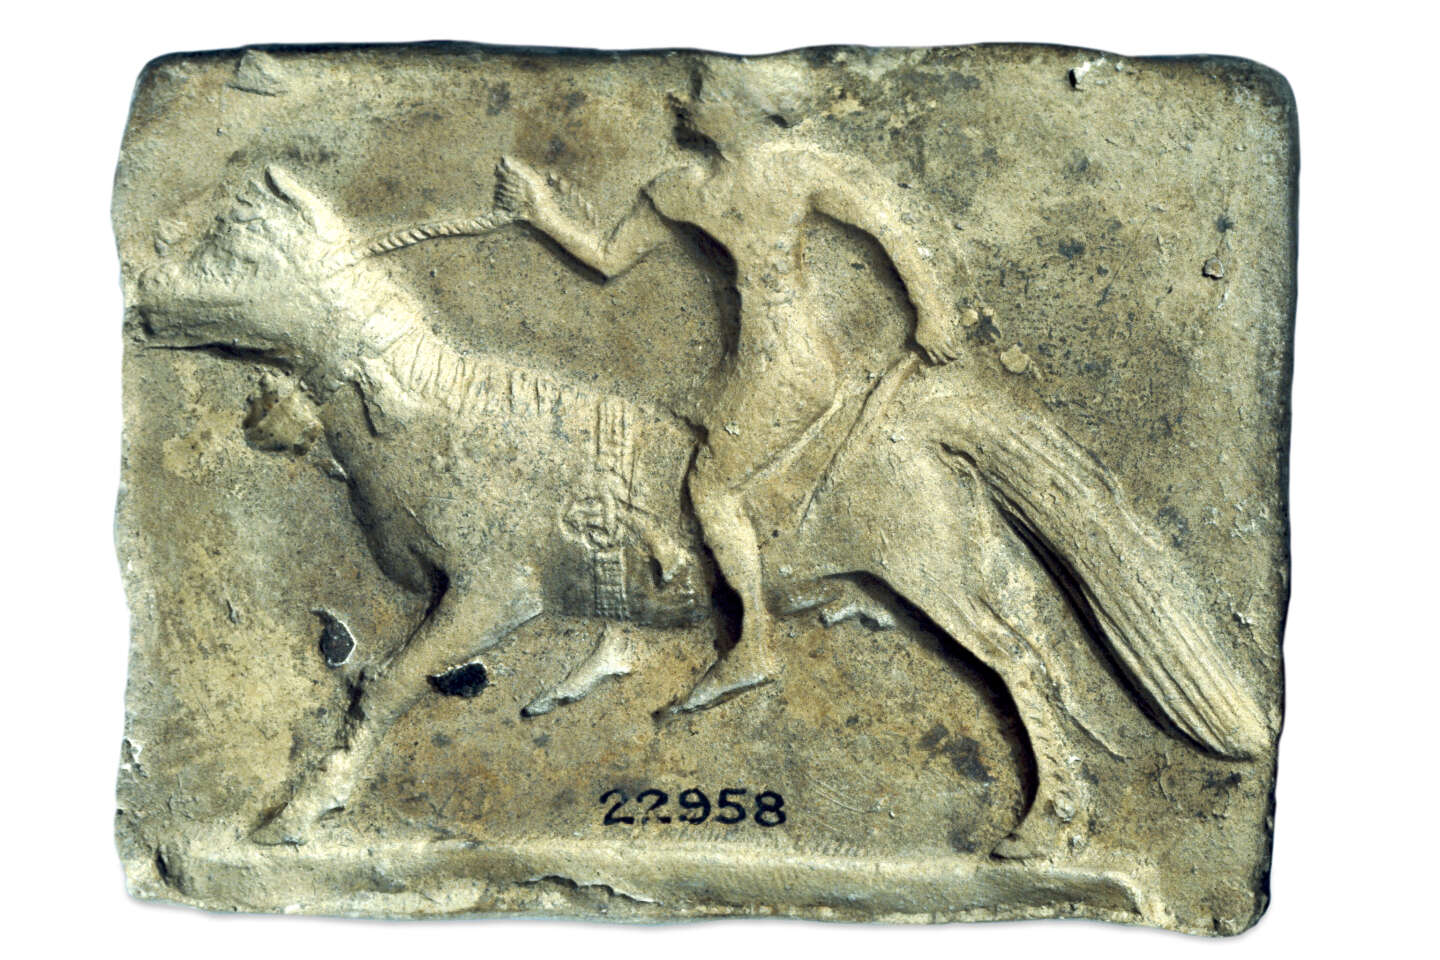 Horseback riding, a five thousand year old practice